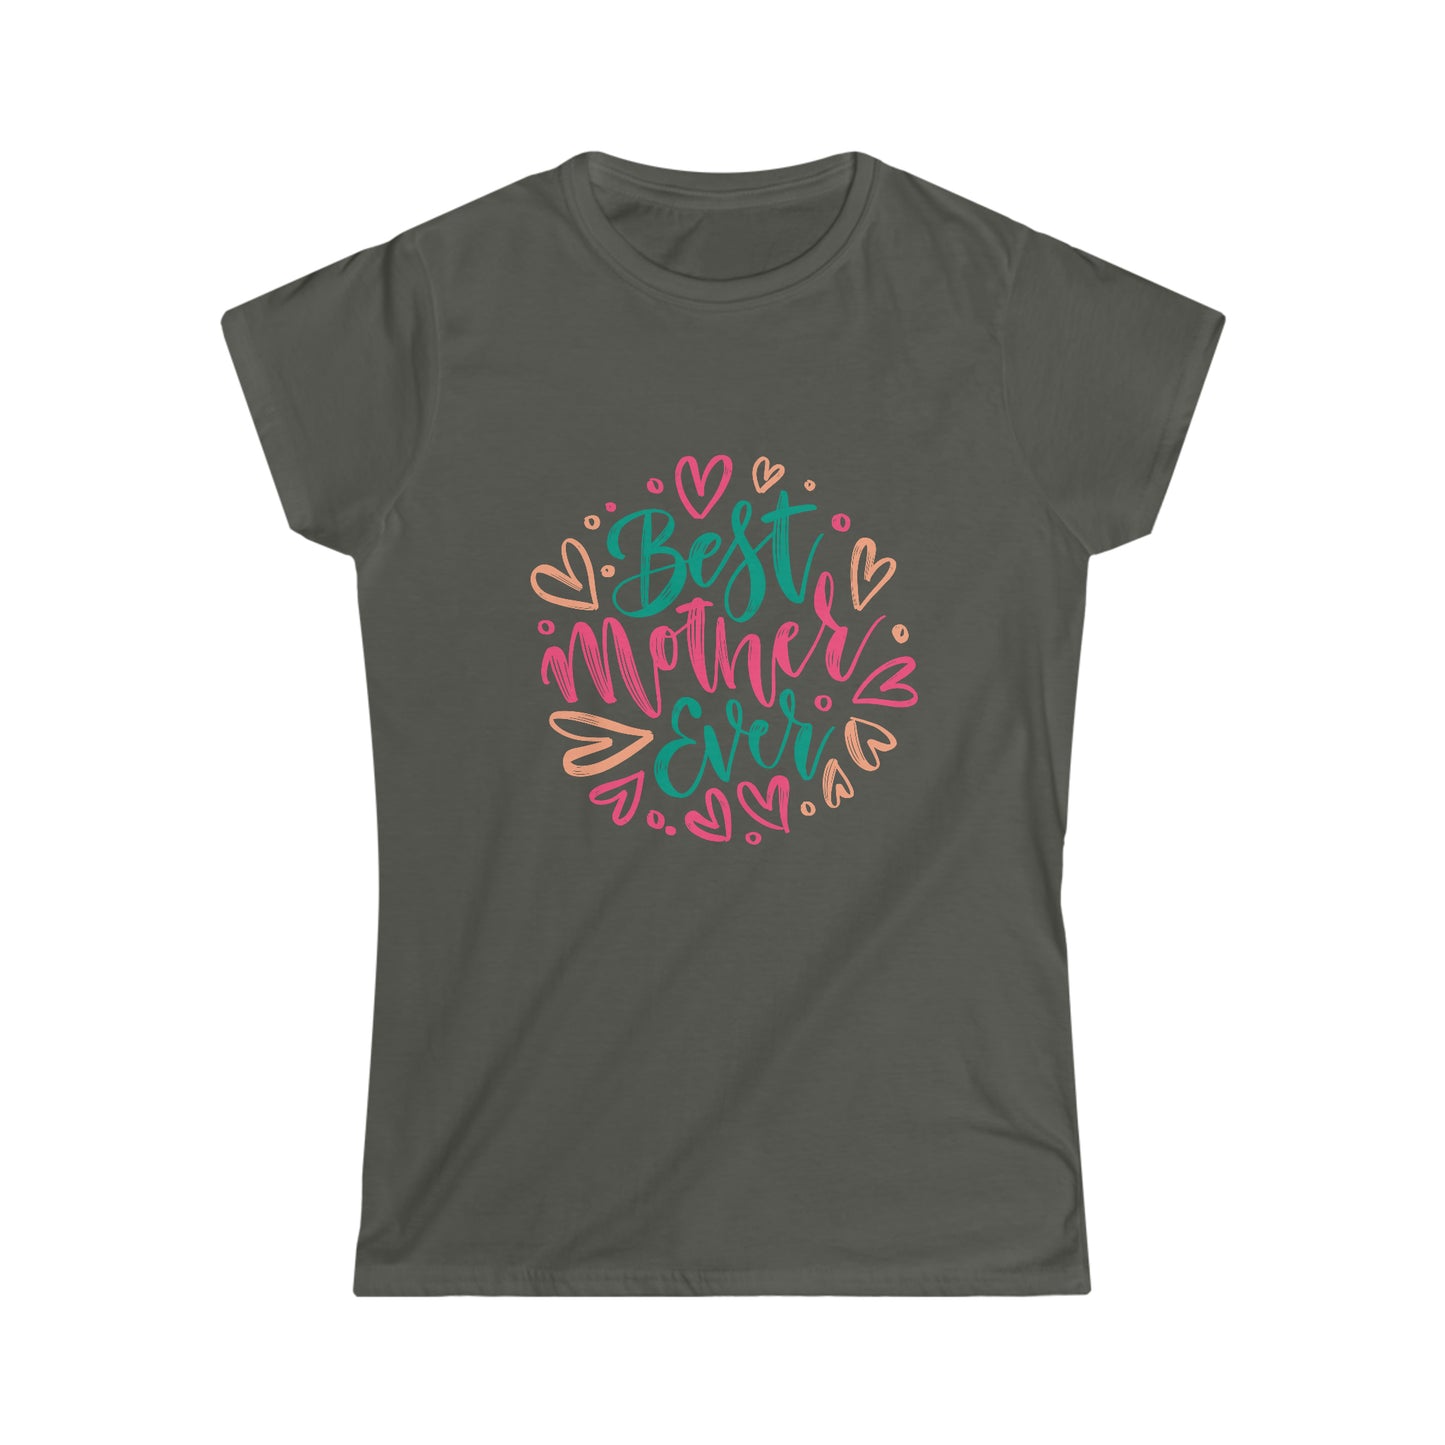 Whether you're celebrating Mother's Day or just want to let her know how much she means to you, our Best Mother Ever charcoal t-shirt is sure to bring a smile to her face.